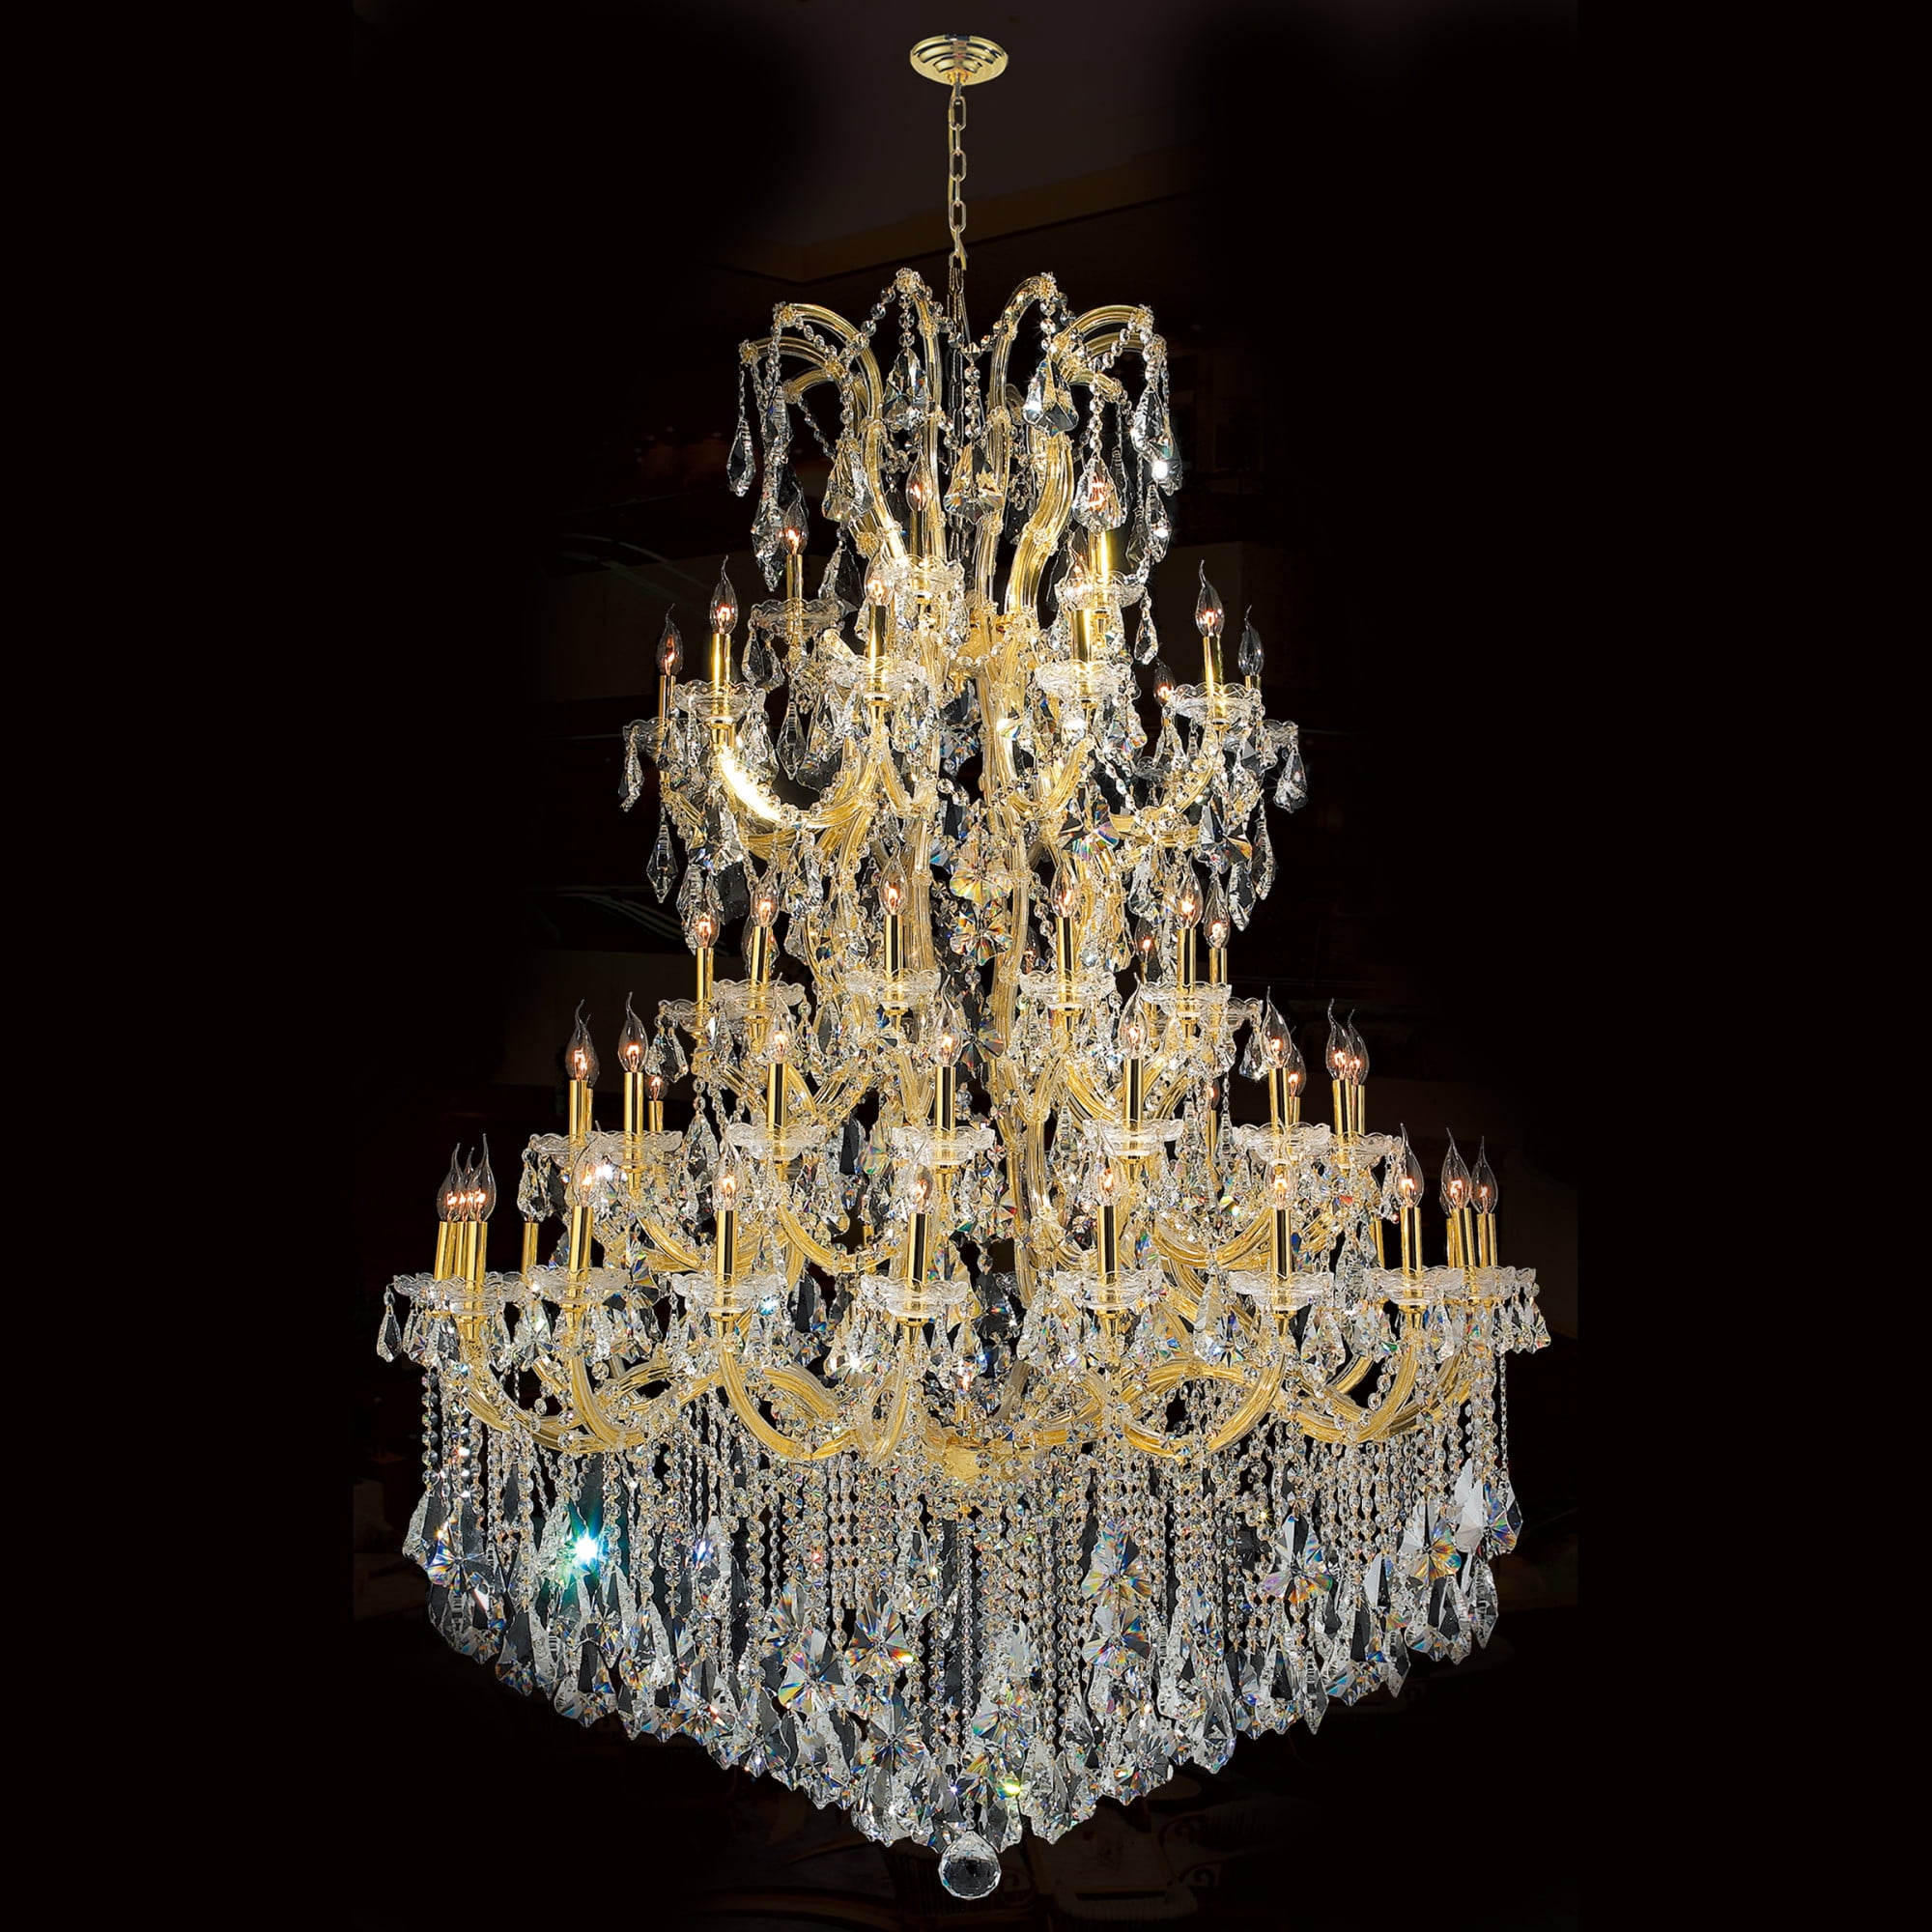 Maria Theresa Collection 61 Light Gold Finish Crystal Chandelier 54